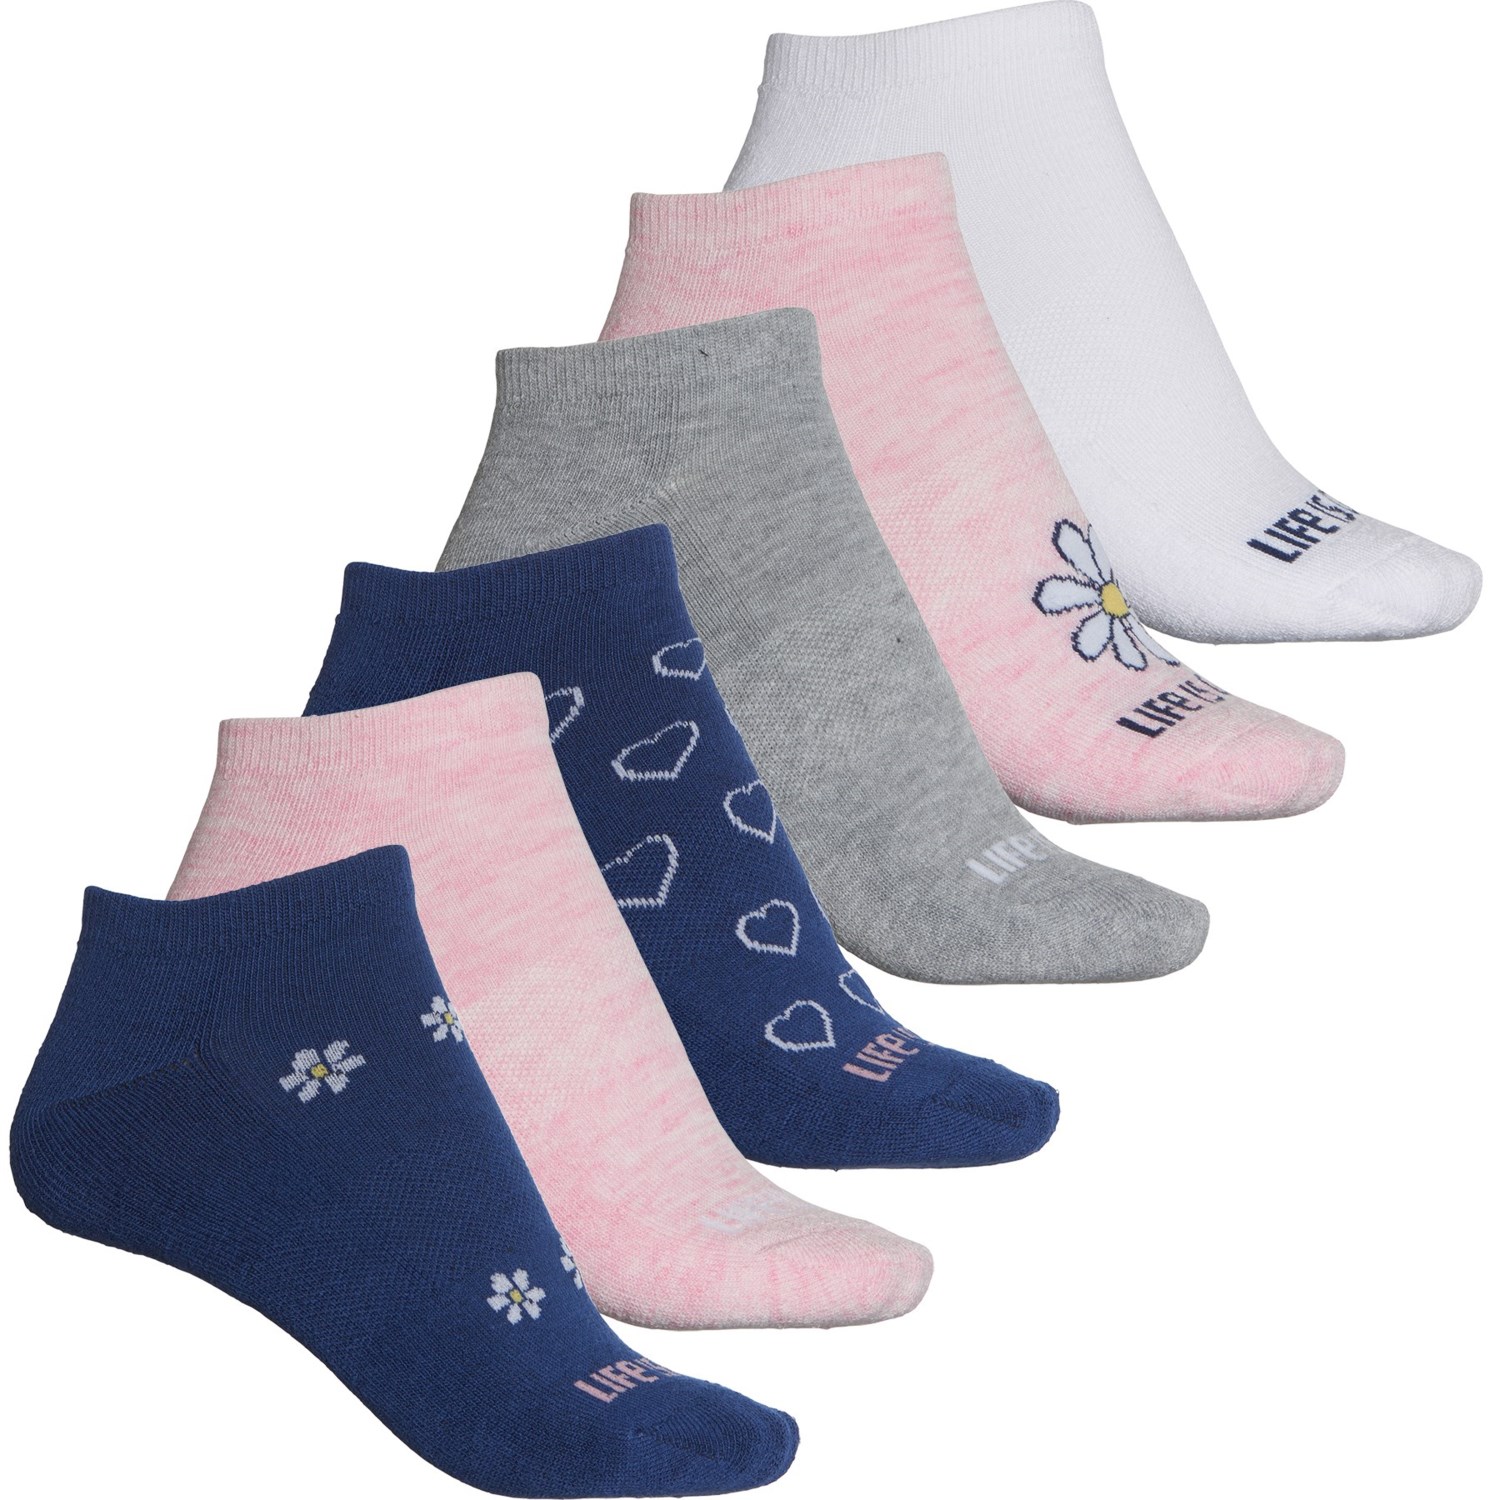 Life is good® Athletic Low-Cut Socks (For Women) - Save 46%